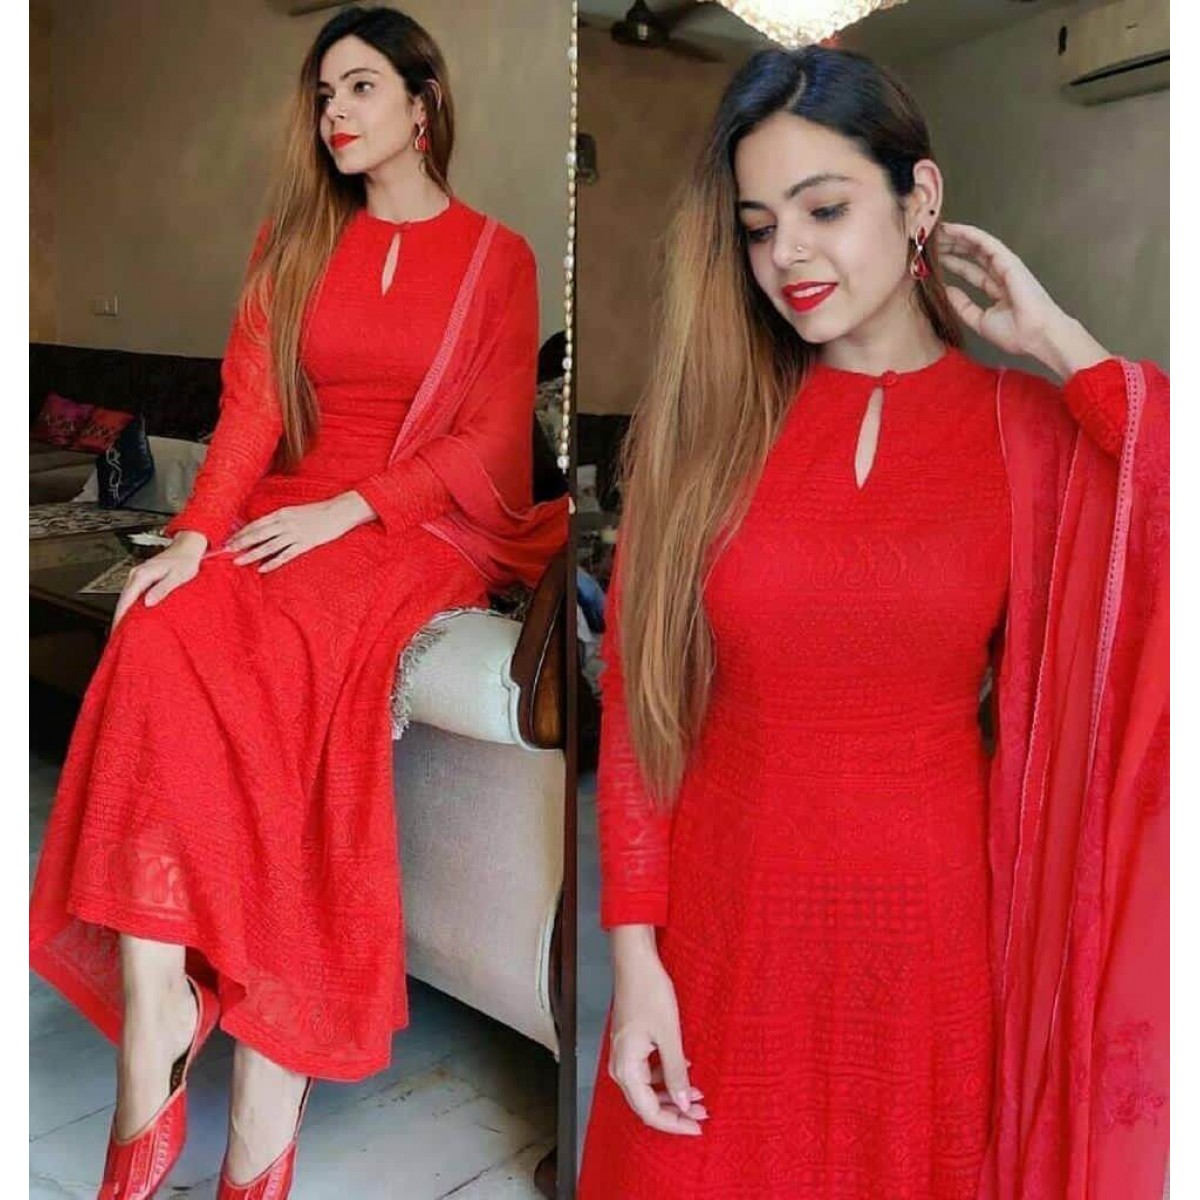 Buy Tomato Red Festive Mughal Gown Online  W for Woman